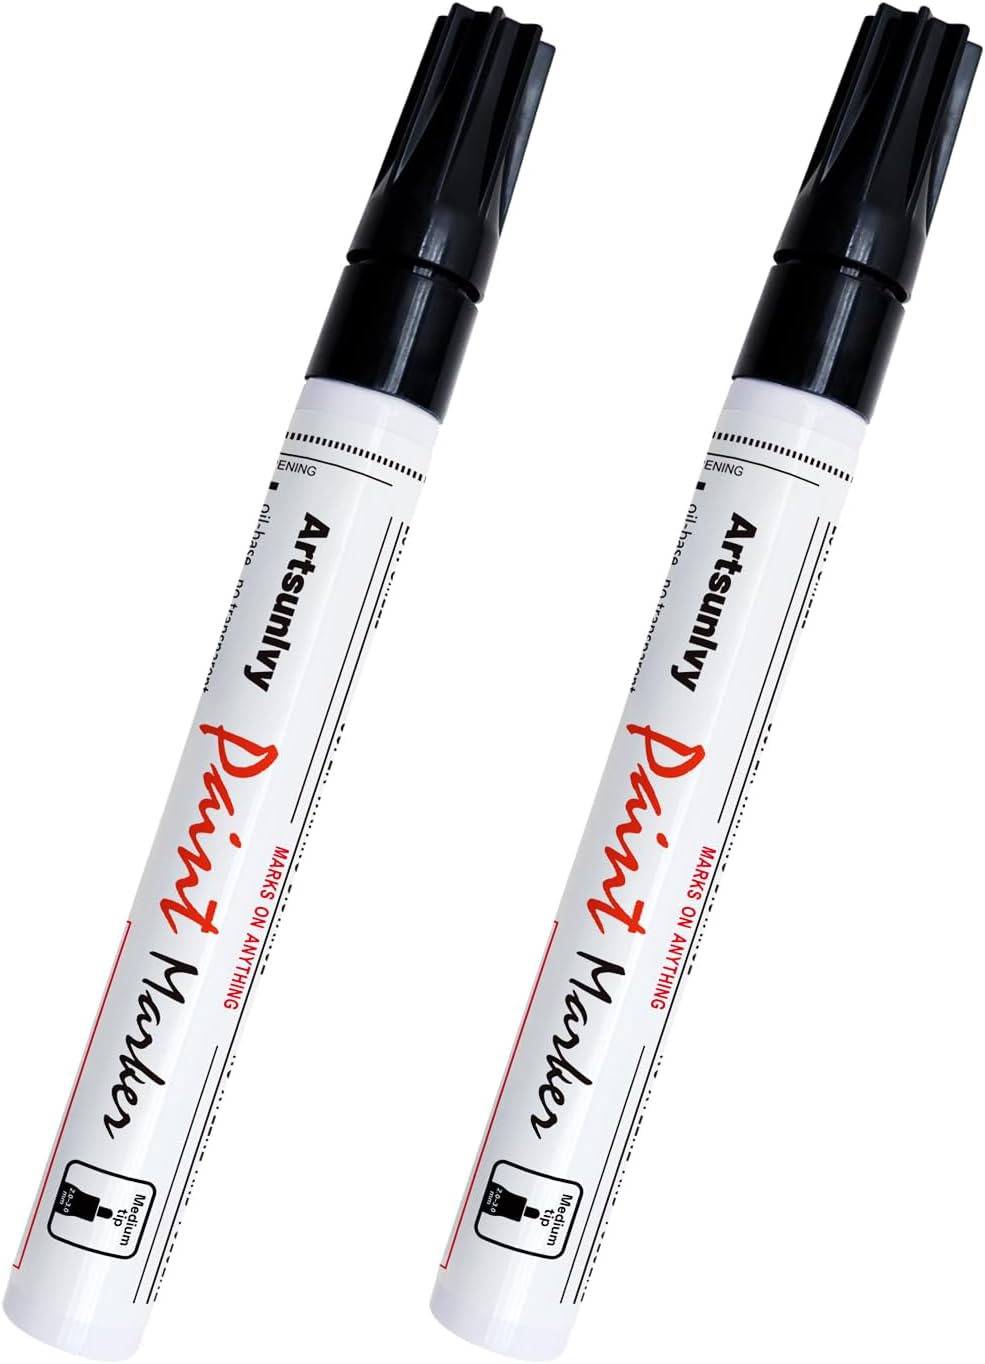 Black Paint Pens Permanent Markers - 2 Pack Oil Based [...]